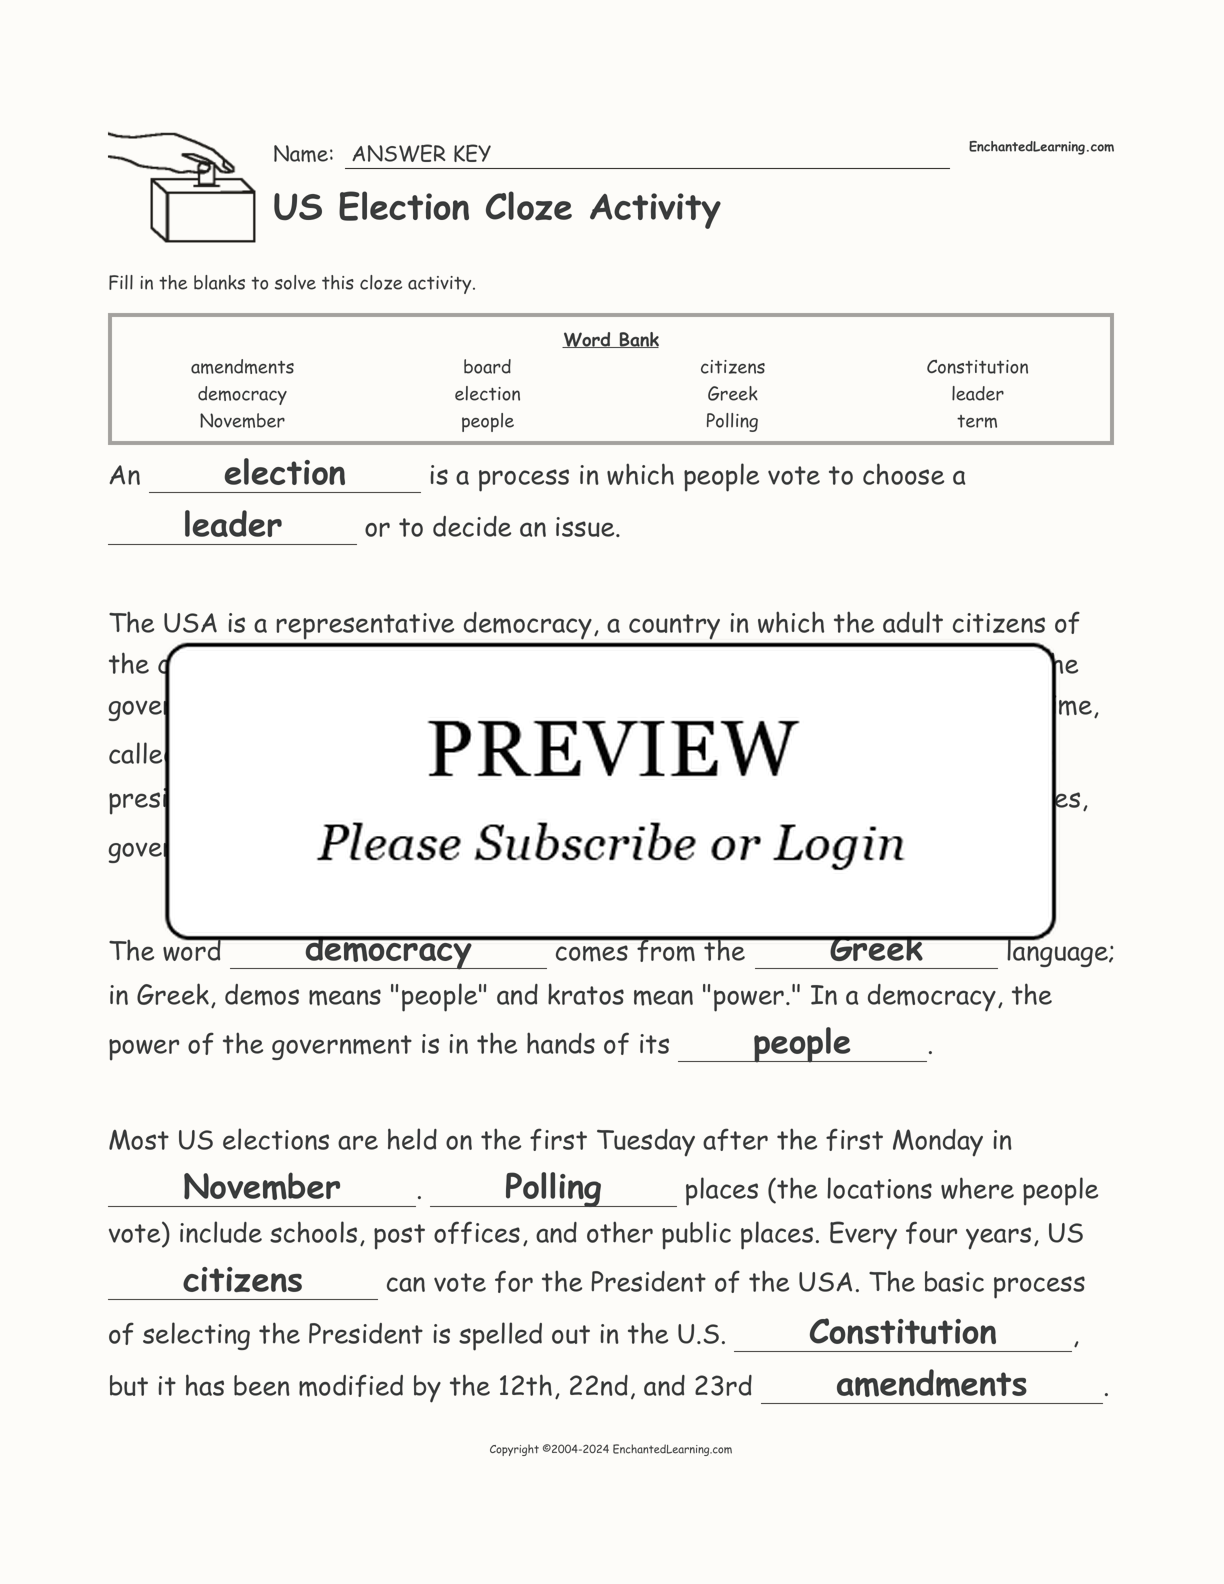 US Election Cloze Activity interactive worksheet page 2